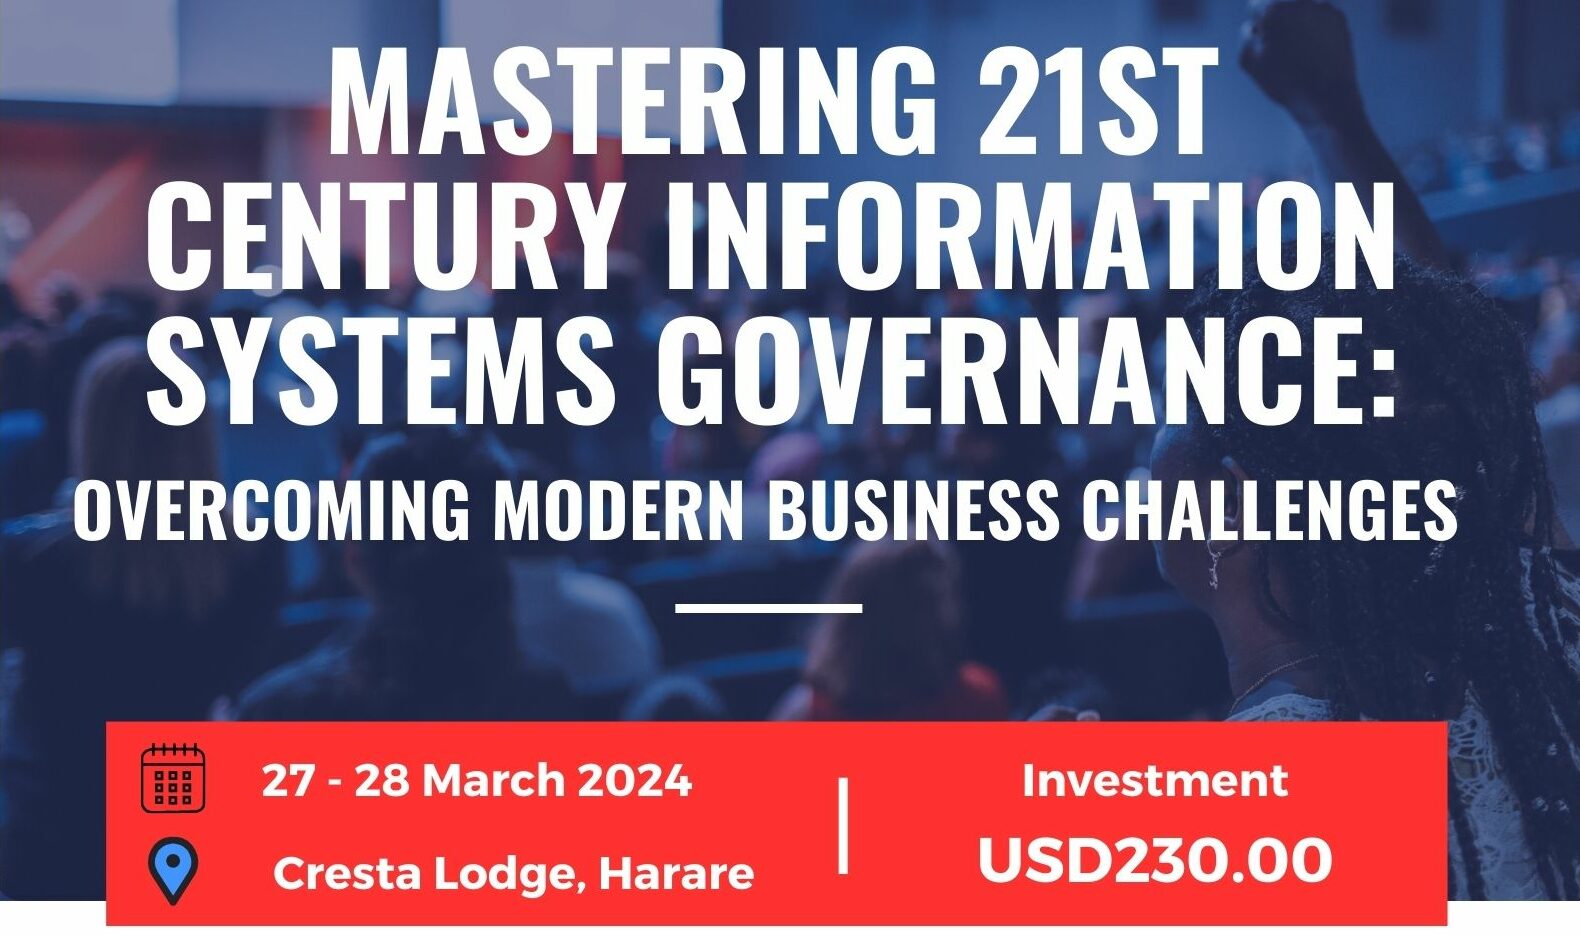 Upcoming Conference: Mastering 21st Century Information Systems Governance: Overcoming Business Challenges